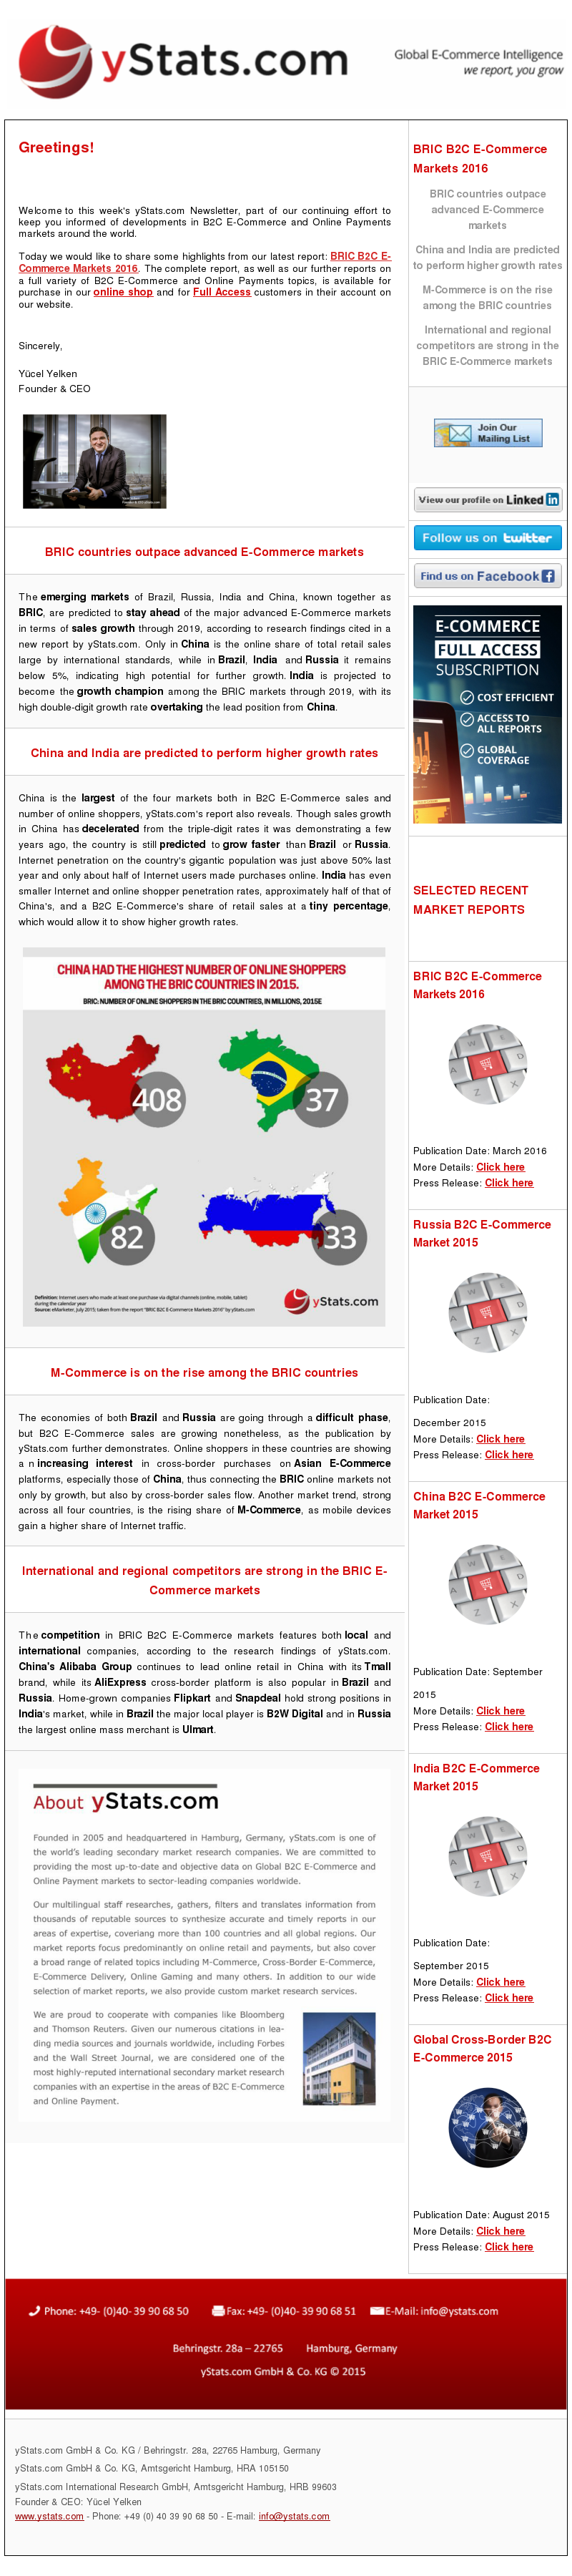 yStats.com Newsletter BRIC B2C E-Commerce Markets 2016 , Brazil , Russia , India , China , emerging markets ,  ecommerce trends , online retail sales , ecommerce competitors , BRIC ecommerce major product category , online shopper penetration rate , retail sales share , mobile shopping market , m-commerce , online shopper , market size , AliExpress , Tmall , Flipkart , Snapdeal , B2W Digital , Alibaba group , online shoppers , mobile shopping , ecommerce players , online shopping , online retail companies competition , local players , international players , newsletter , 2016 The emerging markets of Brazil, Russia, India and China, known together as BRIC, are predicted to stay ahead of the major advanced E-Commerce markets in terms of sales growth through 2019, according to research findings cited in a new report by yStats.com. Only in China is the online share of total retail sales large by international standards, while in Brazil, India and Russia it remains below 5%, indicating high potential for further growth. India is projected to become the growth champion among the BRIC markets through 2019, with its high double-digit growth rate overtaking the lead position from China.

China is the largest of the four markets both in B2C E-Commerce sales and number of online shoppers, yStats.com’s report also reveals. Though sales growth in China has decelerated from the triple-digit rates it was demonstrating a few years ago, the country is still predicted to grow faster than Brazil or Russia. Internet penetration on the country’s gigantic population was just above 50% last year and only about half of Internet users made purchases online. India has even smaller Internet and online shopper penetration rates, approximately half of that of China’s, and a B2C E-Commerce’s share of retail sales at a tiny percentage, which would allow it to show higher growth rates.

The economies of both Brazil and Russia are going through a difficult phase, but B2C E-Commerce sales are growing nonetheless, as the publication by yStats.com further demonstrates. Online shoppers in these countries are showing an increasing interest in cross-border purchases on Asian E-Commerce platforms, especially those of China, thus connecting the BRIC online markets not only by growth, but also by cross-border sales flow. Another market trend, strong across all four countries, is the rising share of M-Commerce, as mobile devices gain a higher share of Internet traffic.

The competition in BRIC B2C E-Commerce markets features both local and international companies, according to the research findings of yStats.com. China’s Alibaba Group continues to lead online retail in China with its Tmall brand, while its AliExpress cross-border platform is also popular in Brazil and Russia. Home-grown companies Flipkart and Snapdeal hold strong positions in India’s market, while in Brazil the major local player is B2W Digital and in Russia the largest online mass merchant is Ulmart.